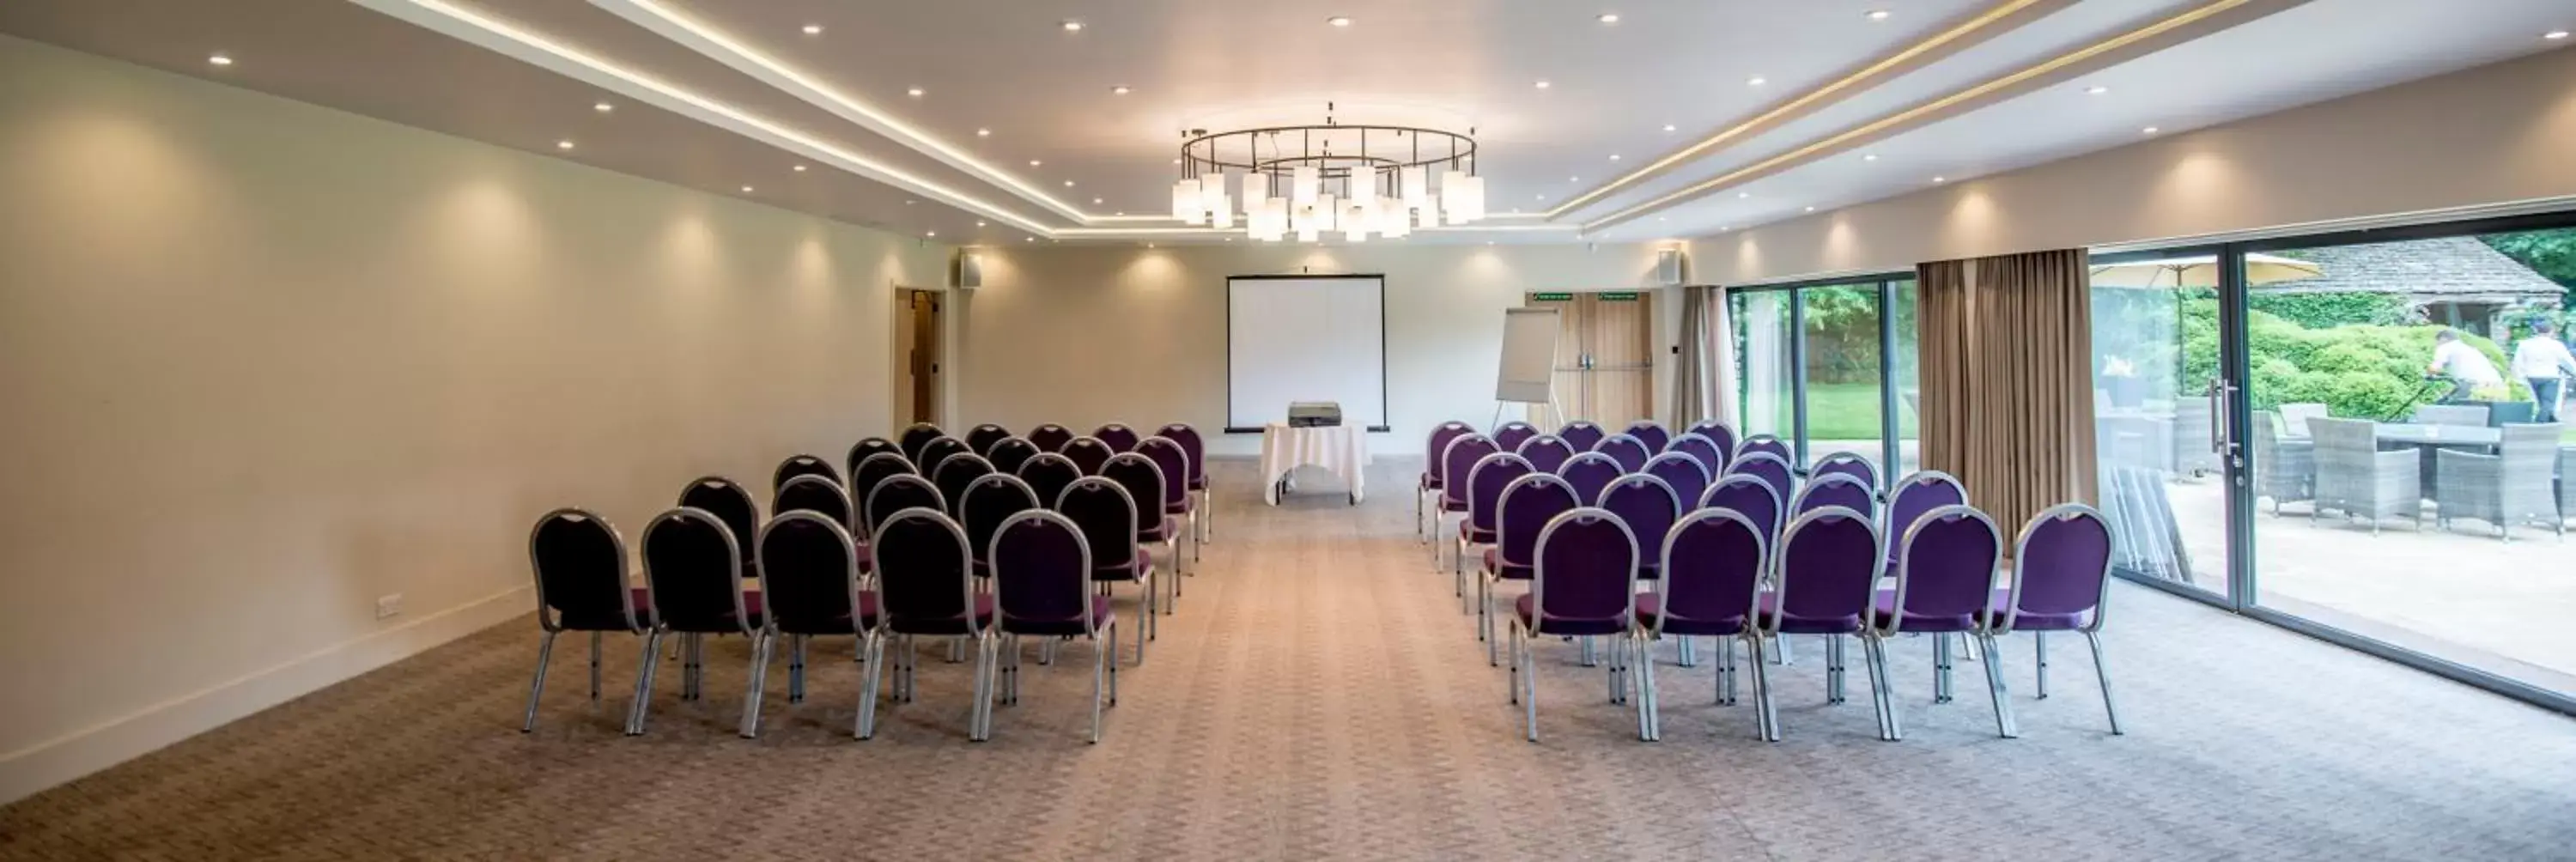 Banquet/Function facilities in Stonehouse Court Hotel - A Bespoke Hotel